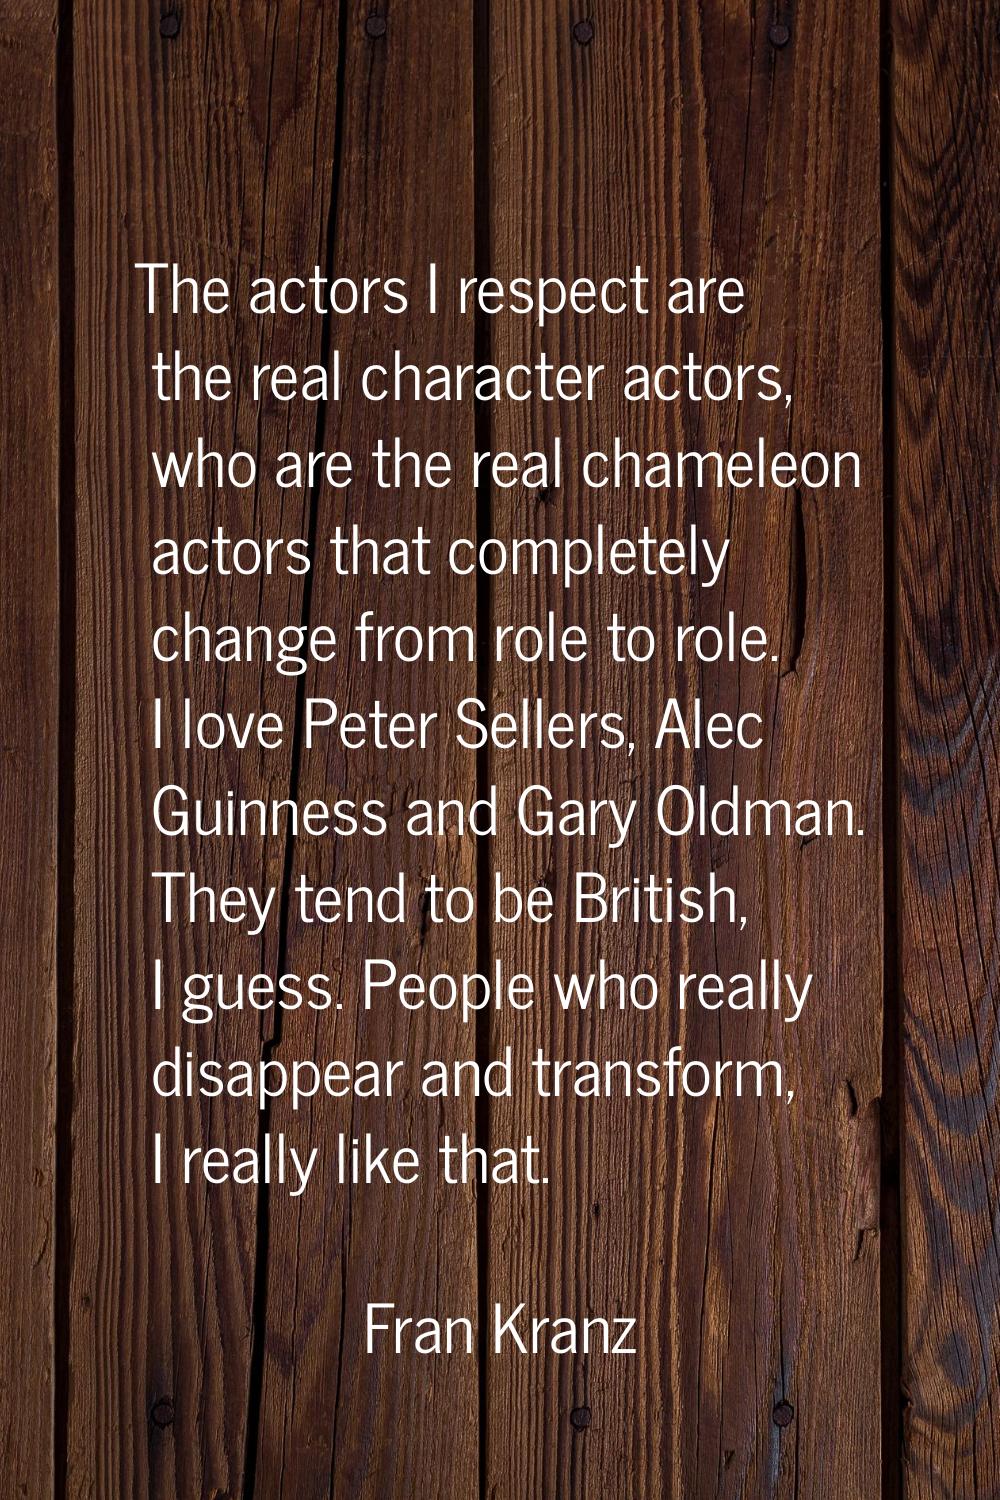 The actors I respect are the real character actors, who are the real chameleon actors that complete